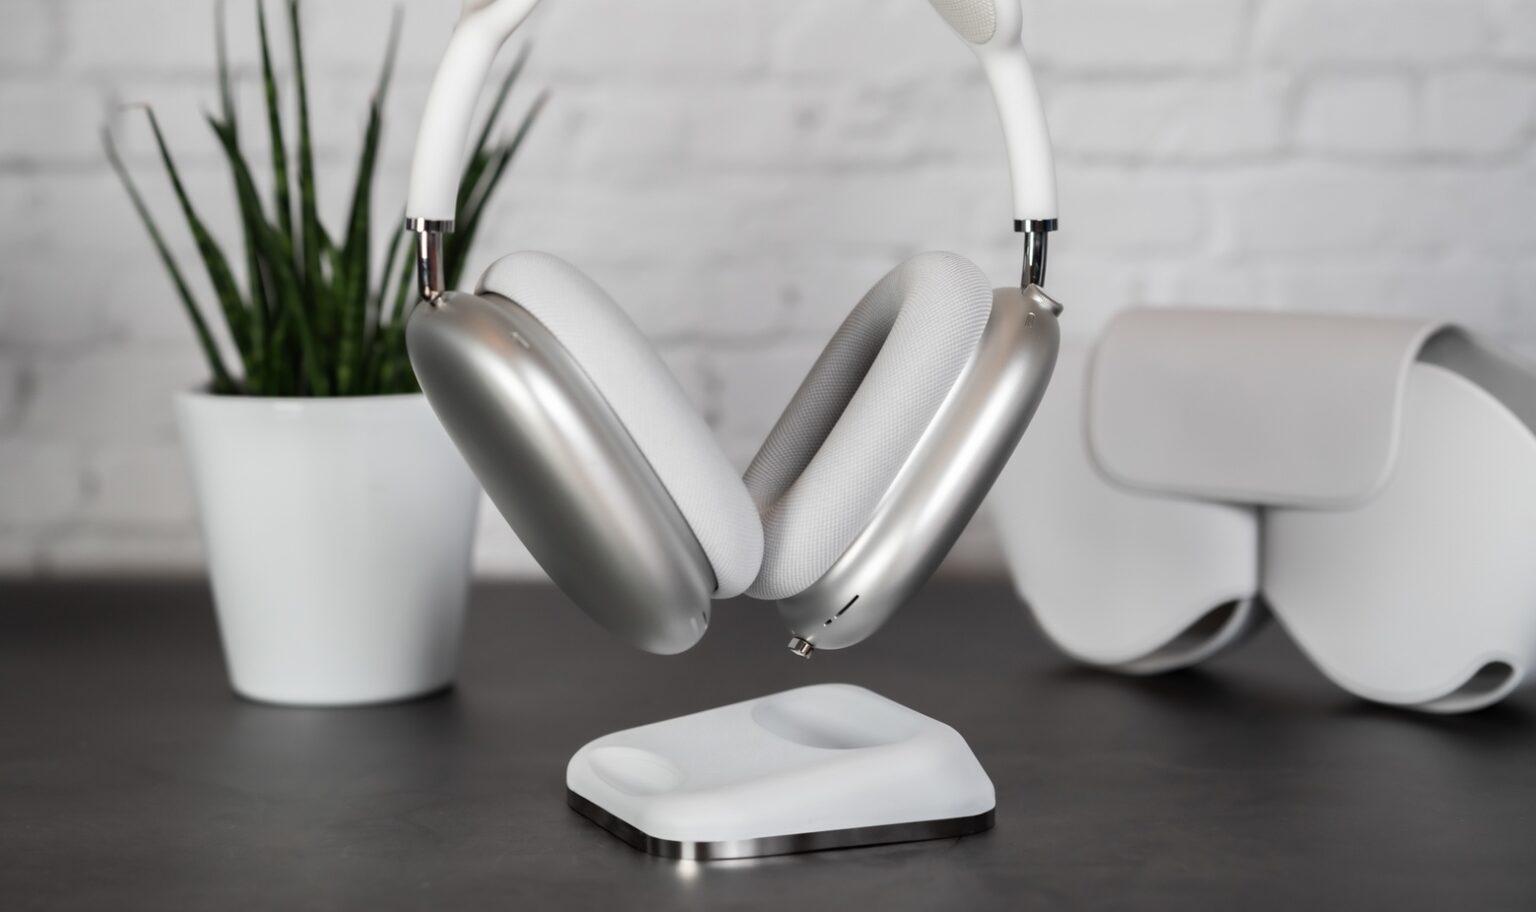 Fix a glaring limitation of AirPods Max with the Max Stand